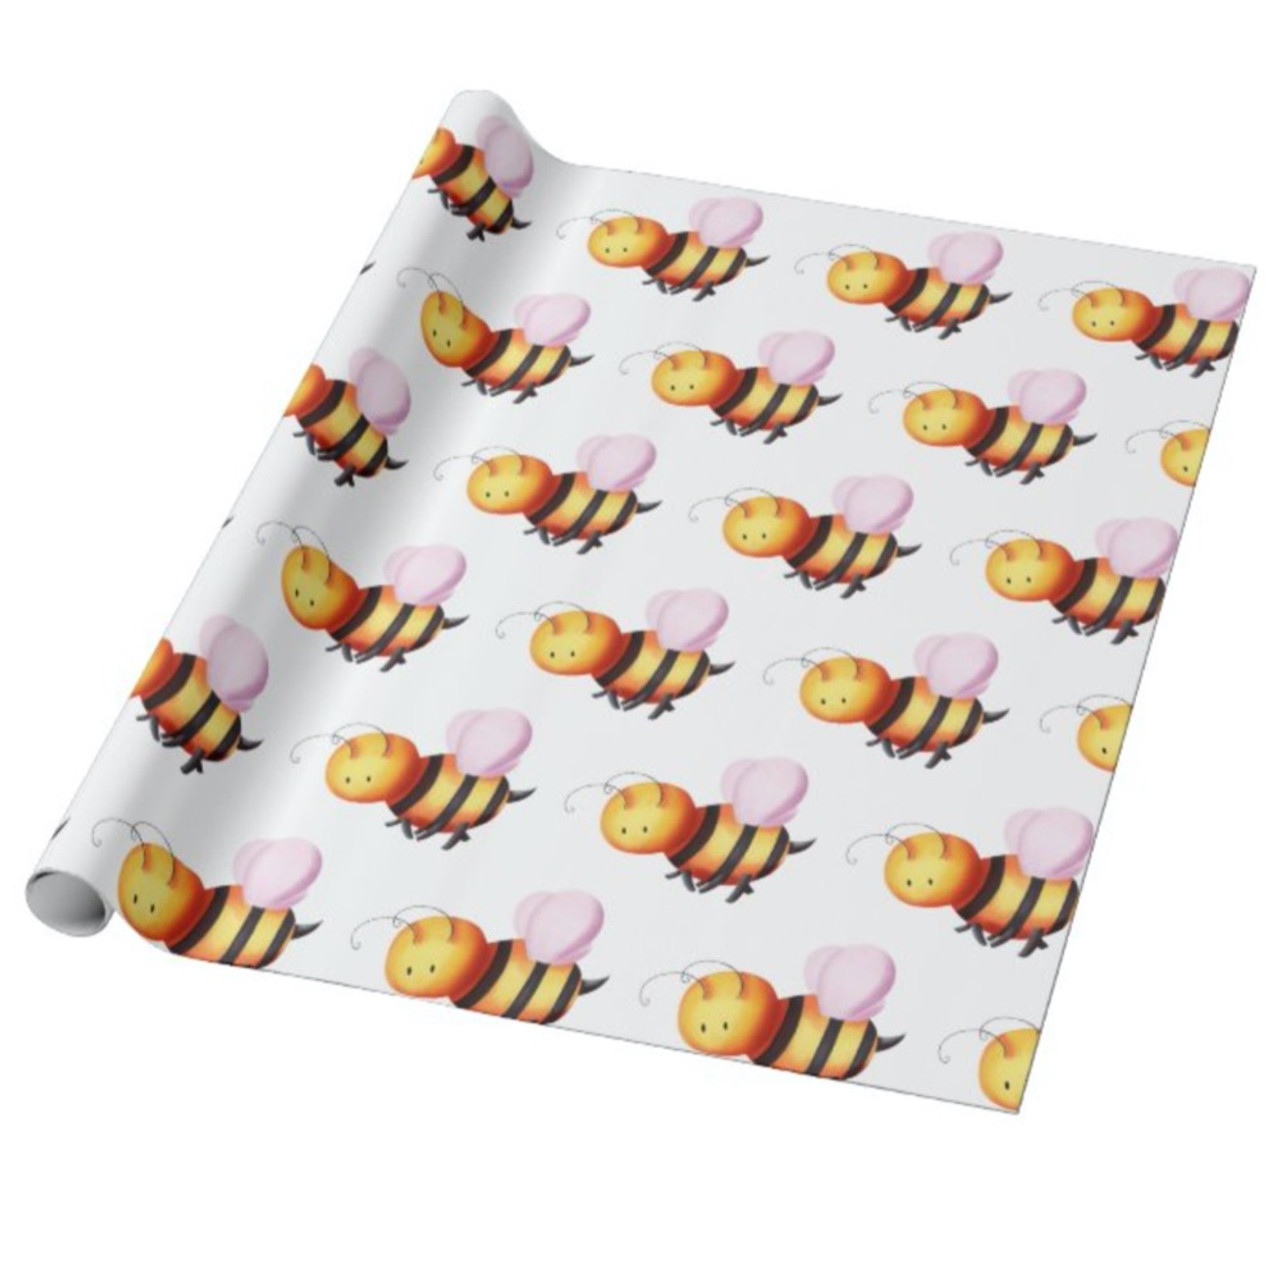 Cute Bumble Bee with Pink Wings Patterned Wrapping Wrapping Paper - Kinda  Cute by Patricia Alvarez